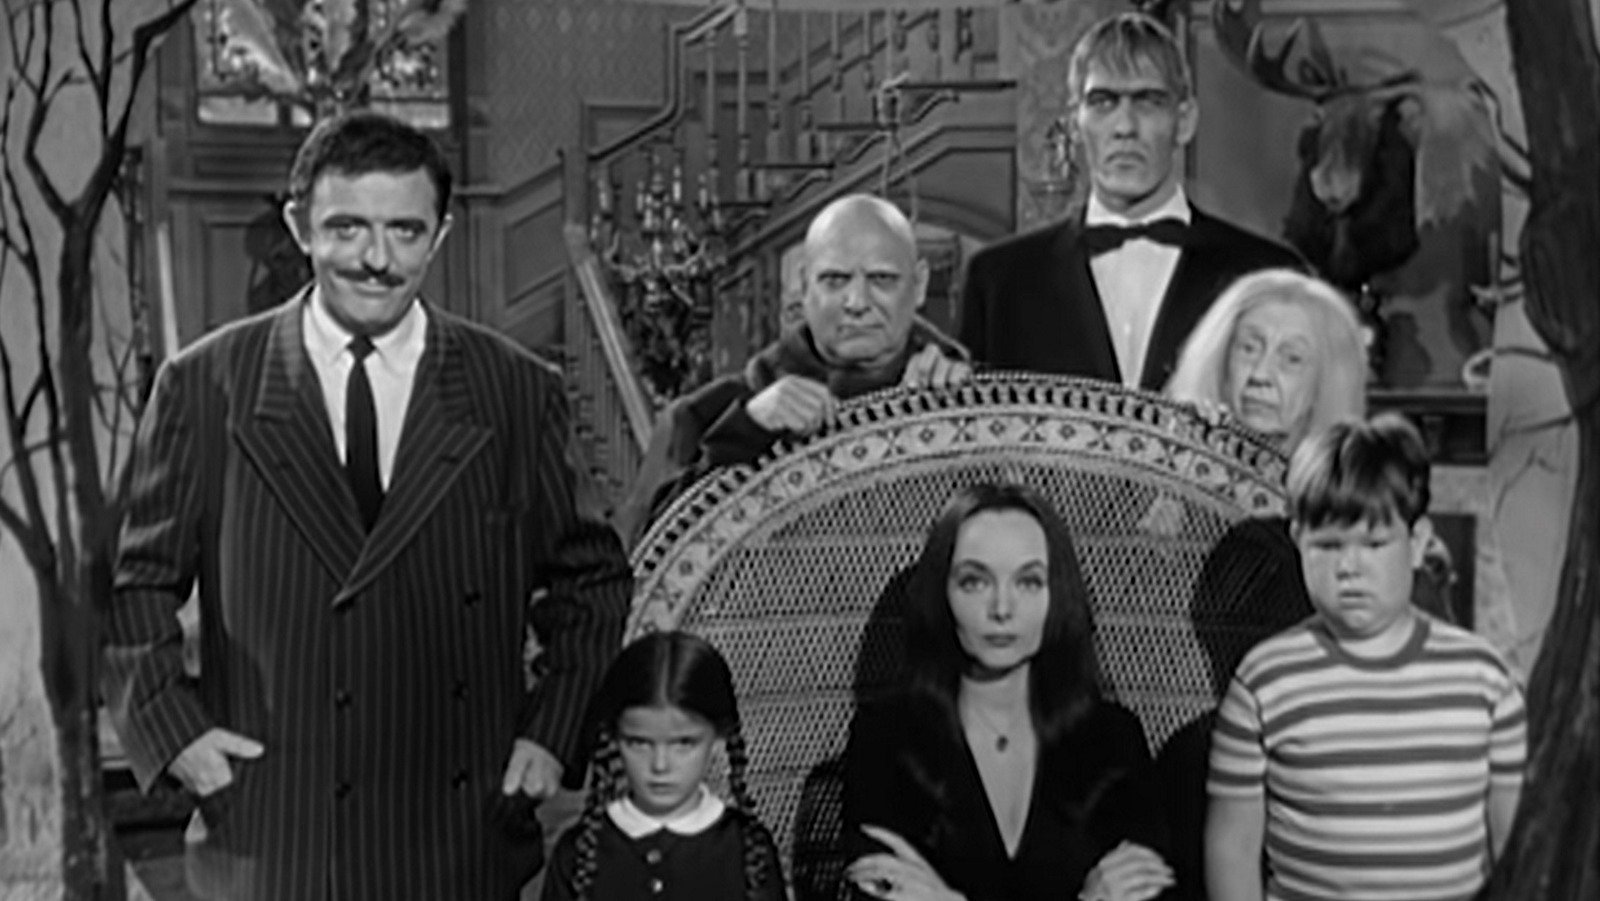 How Much Do You Remember About The Addams Family?